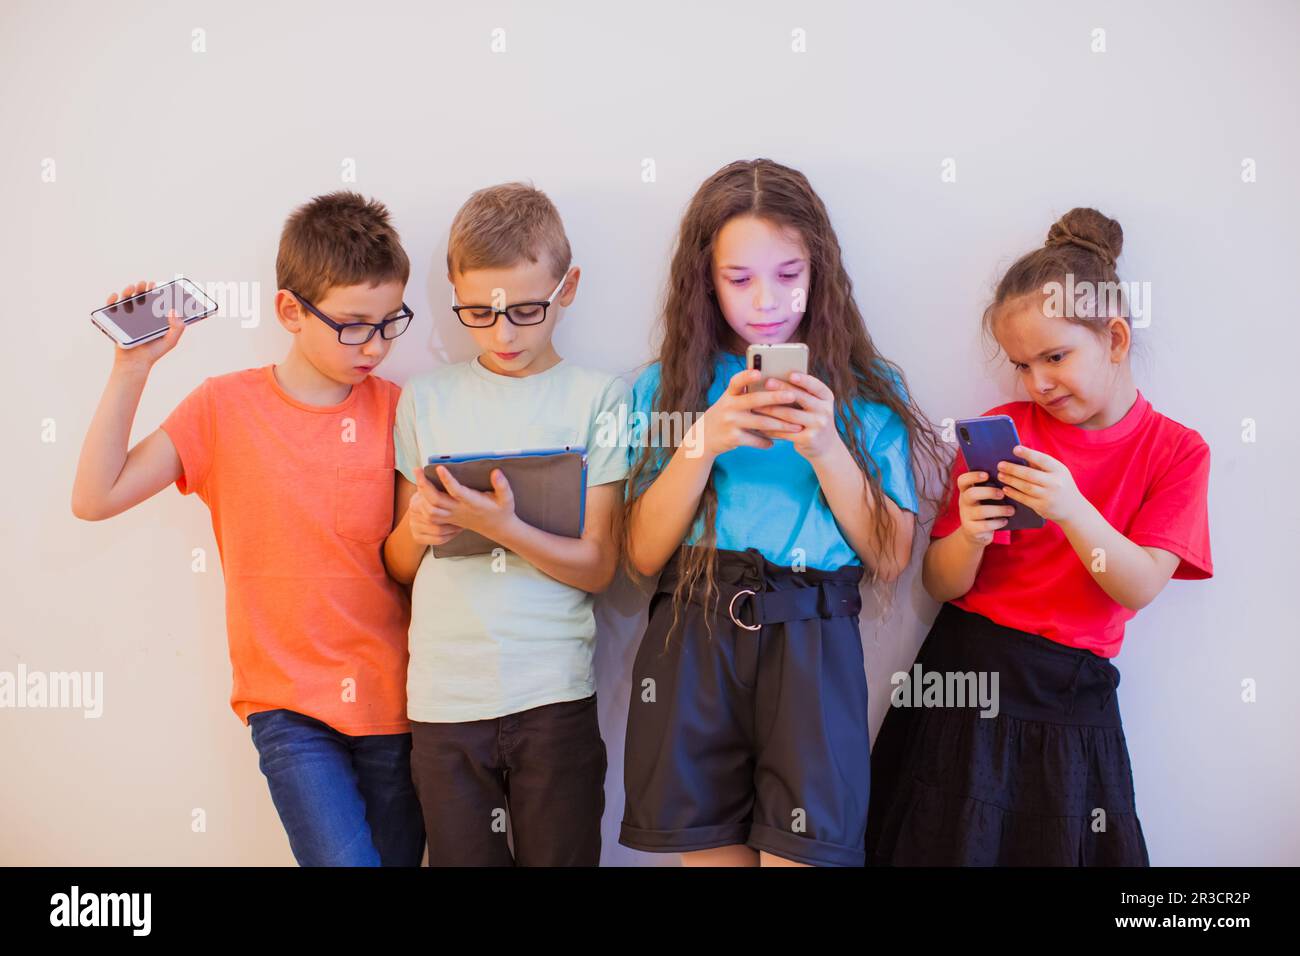 Kids and gadgets are best frieds in modern life Stock Photo